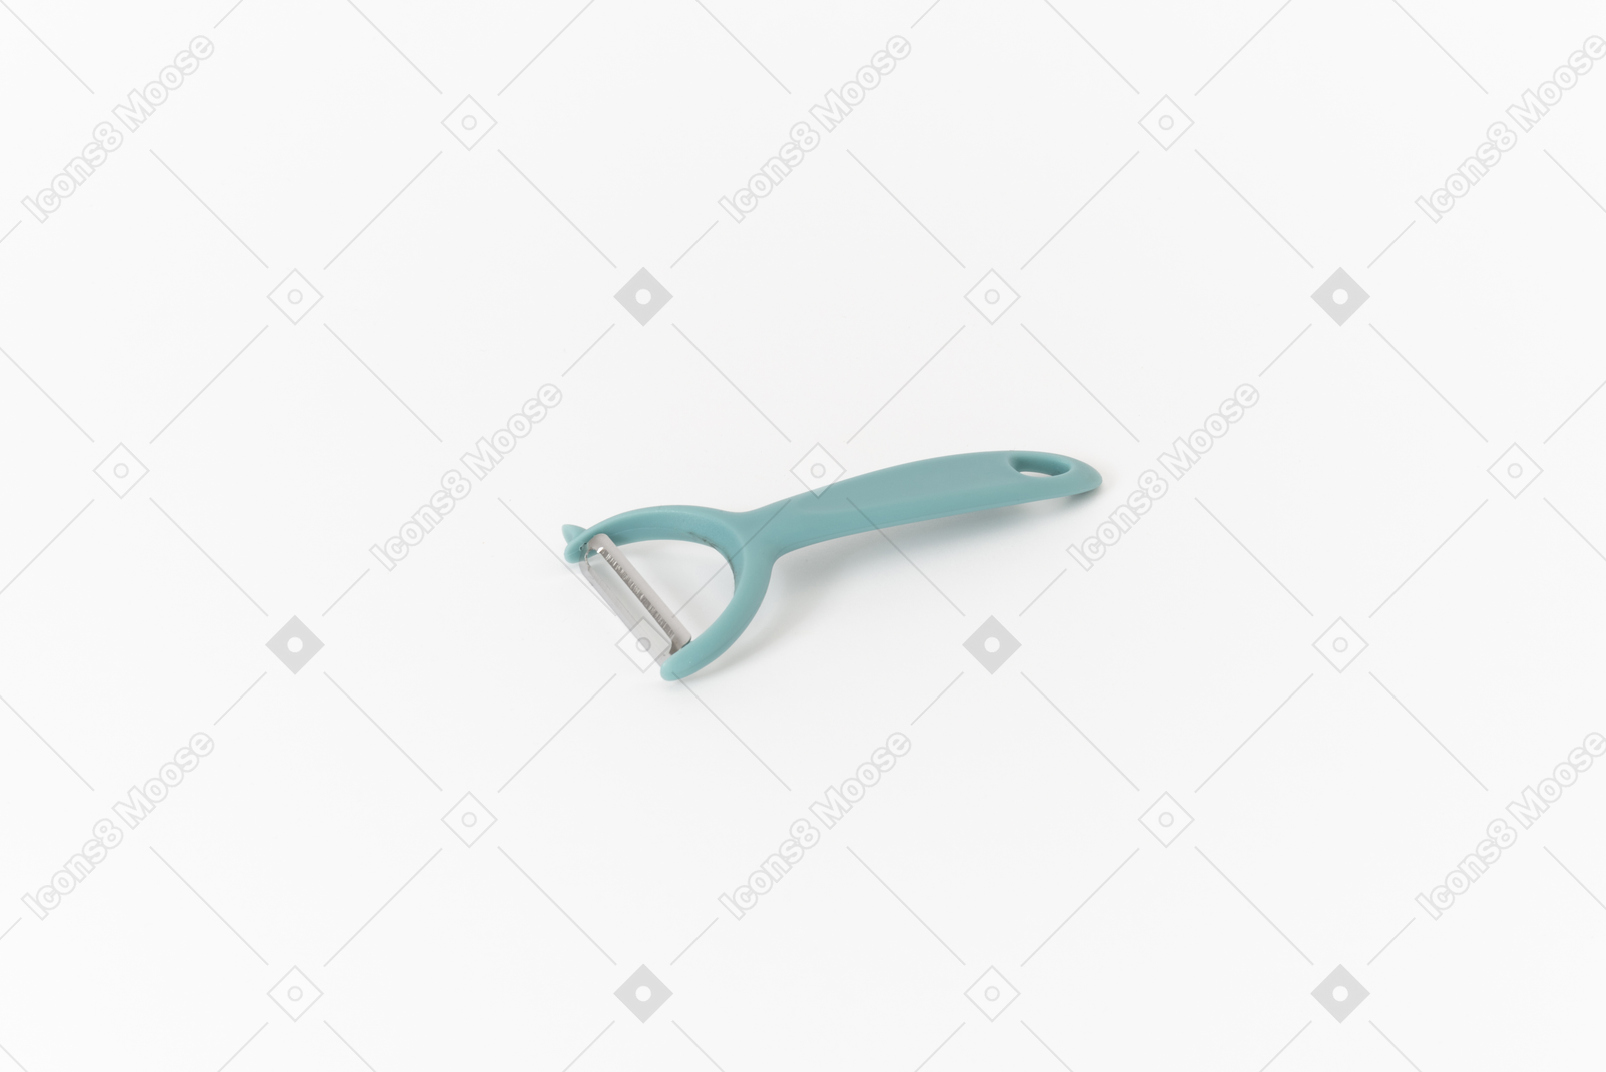 Kitchen tool for removing the outer skin of some vegetables